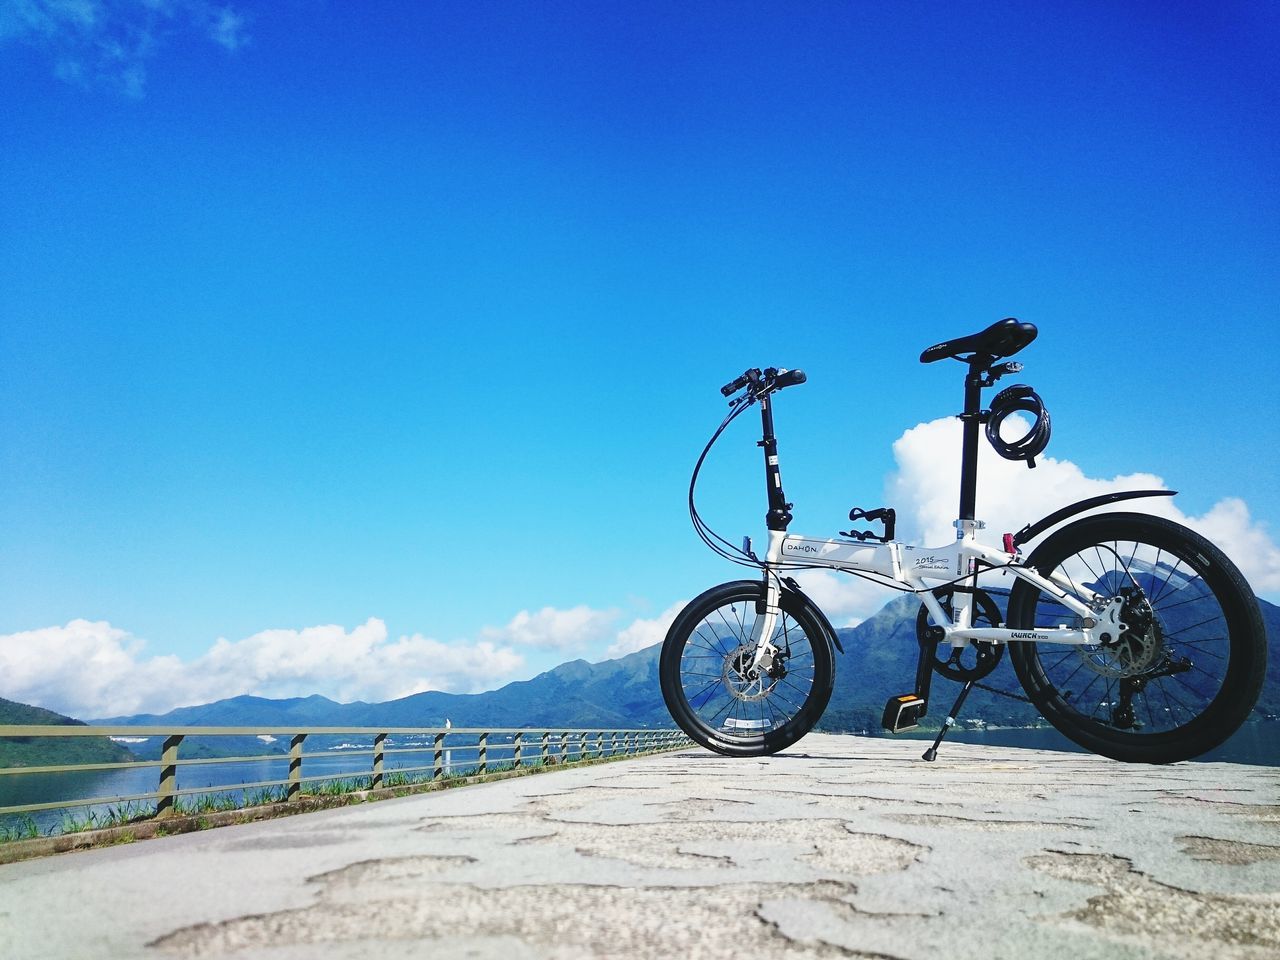 bicycle, transportation, mode of transport, land vehicle, stationary, blue, parked, parking, copy space, clear sky, sky, day, travel, side view, sunlight, cycle, outdoors, road, tranquility, riding